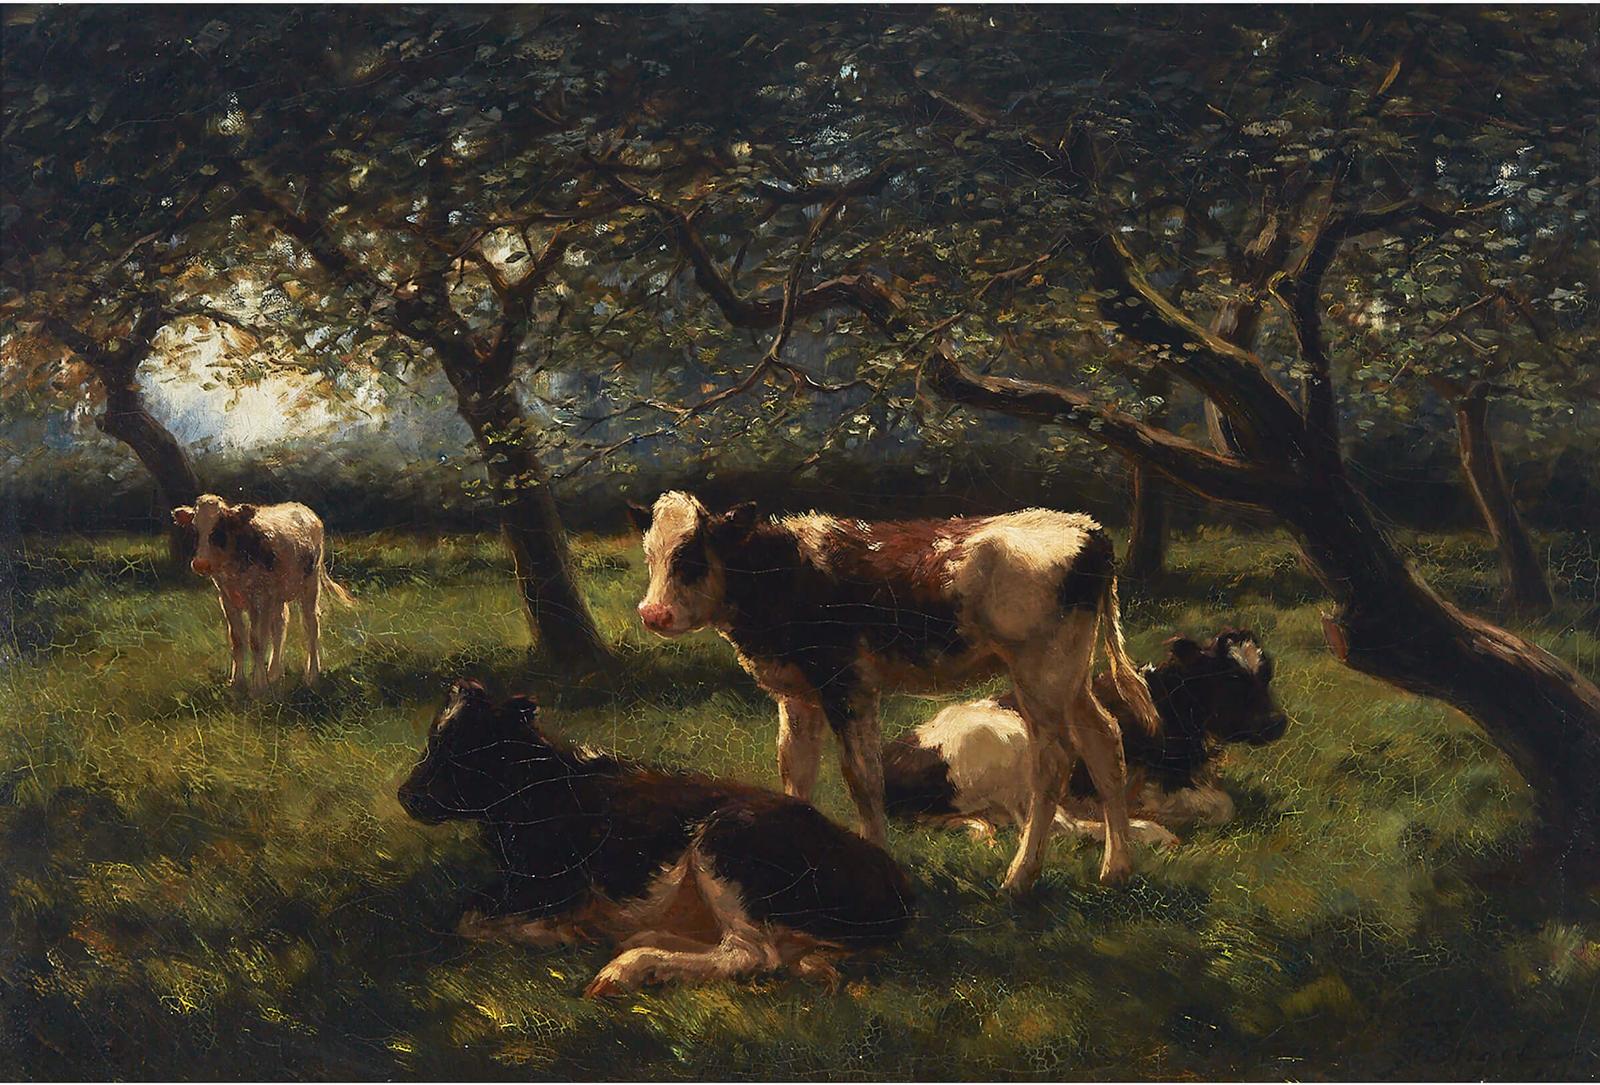 Frederik Engel (1872-1958) - Calves  In A Shaded Pasture, 1913